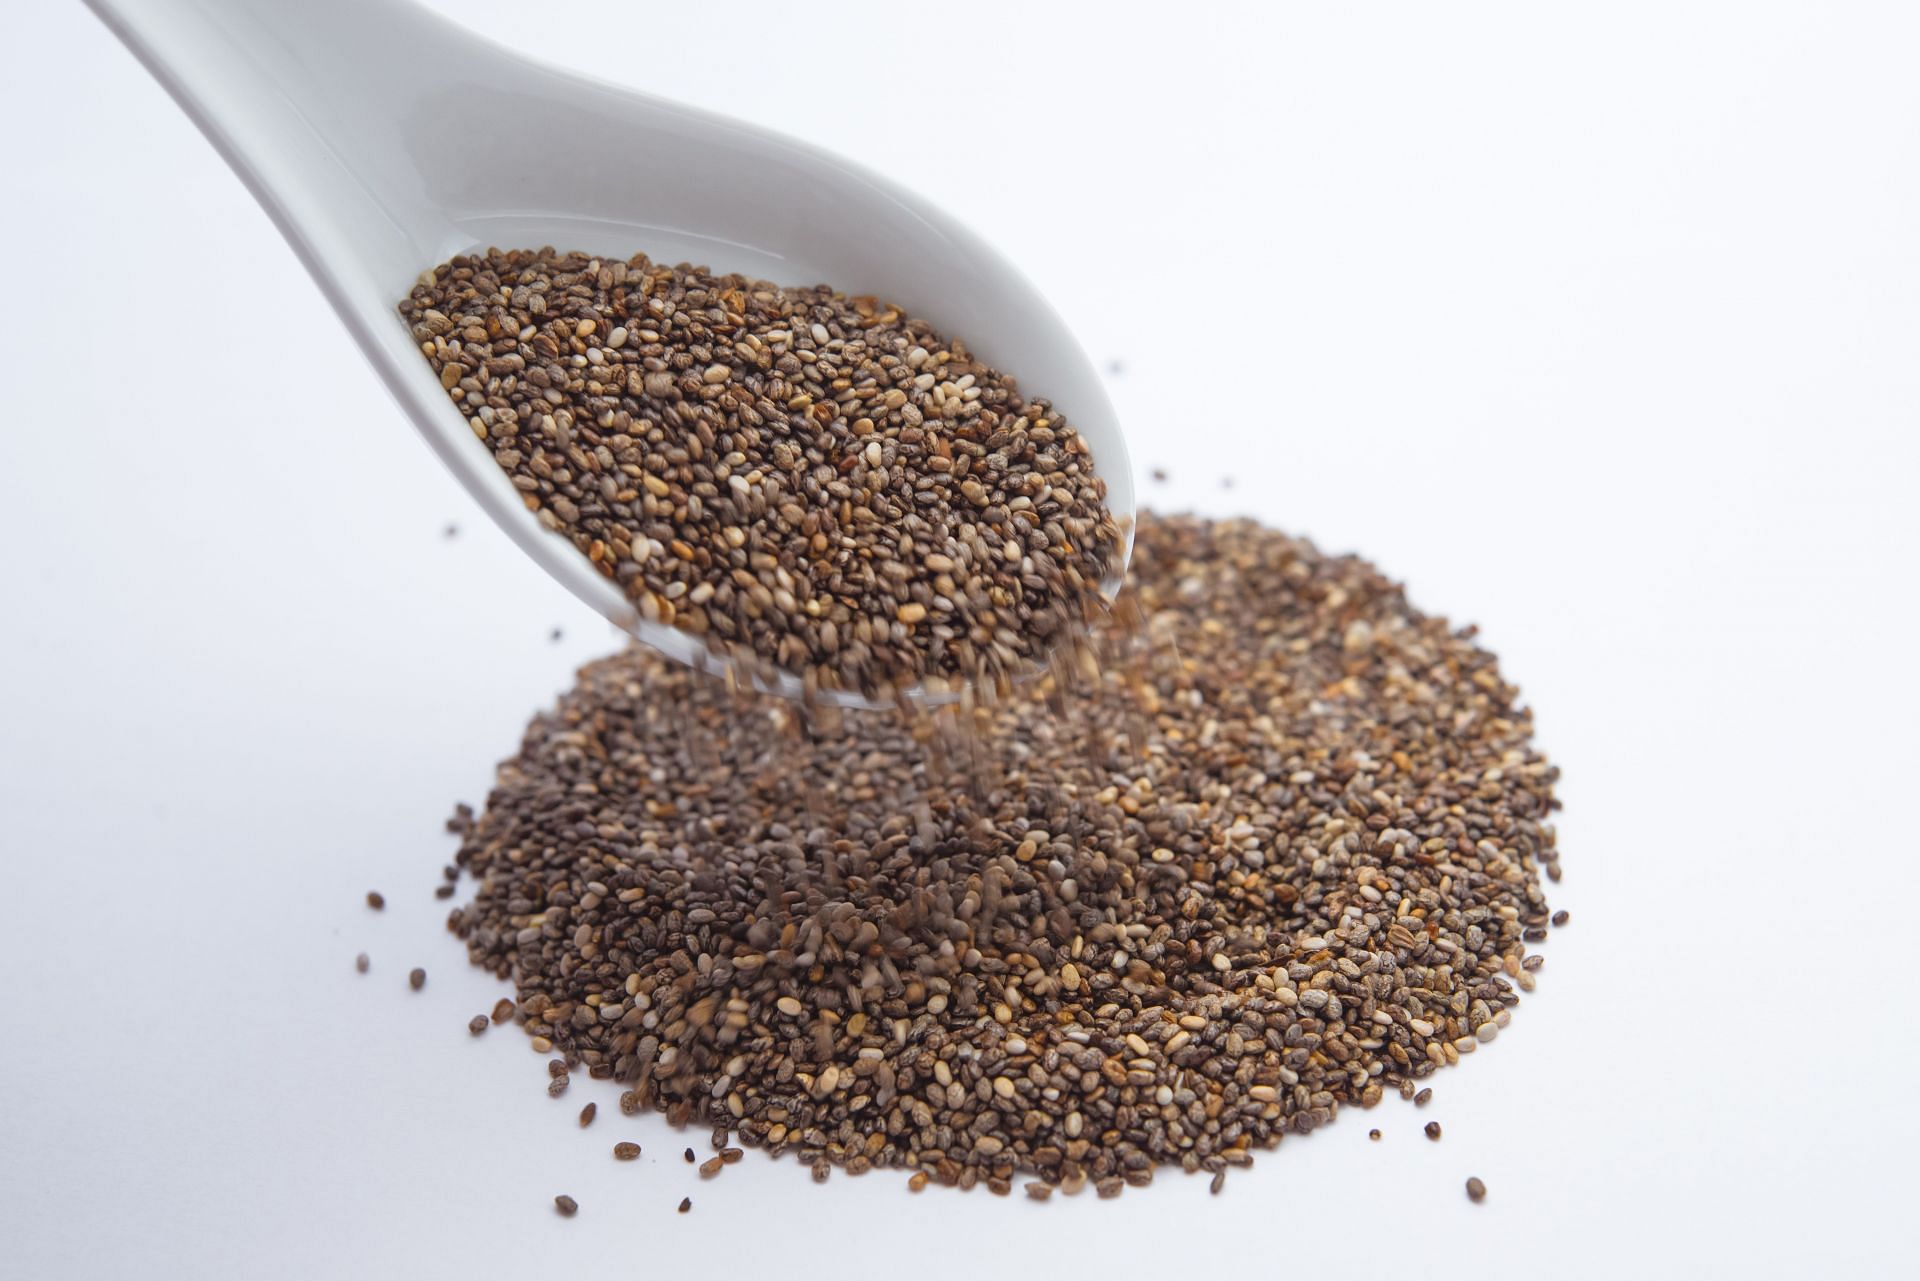 These seeds are a rich source of omega-3 fatty acids, fiber, protein, vitamins, and minerals, making them a great addition to any diet  (image via Pexels)